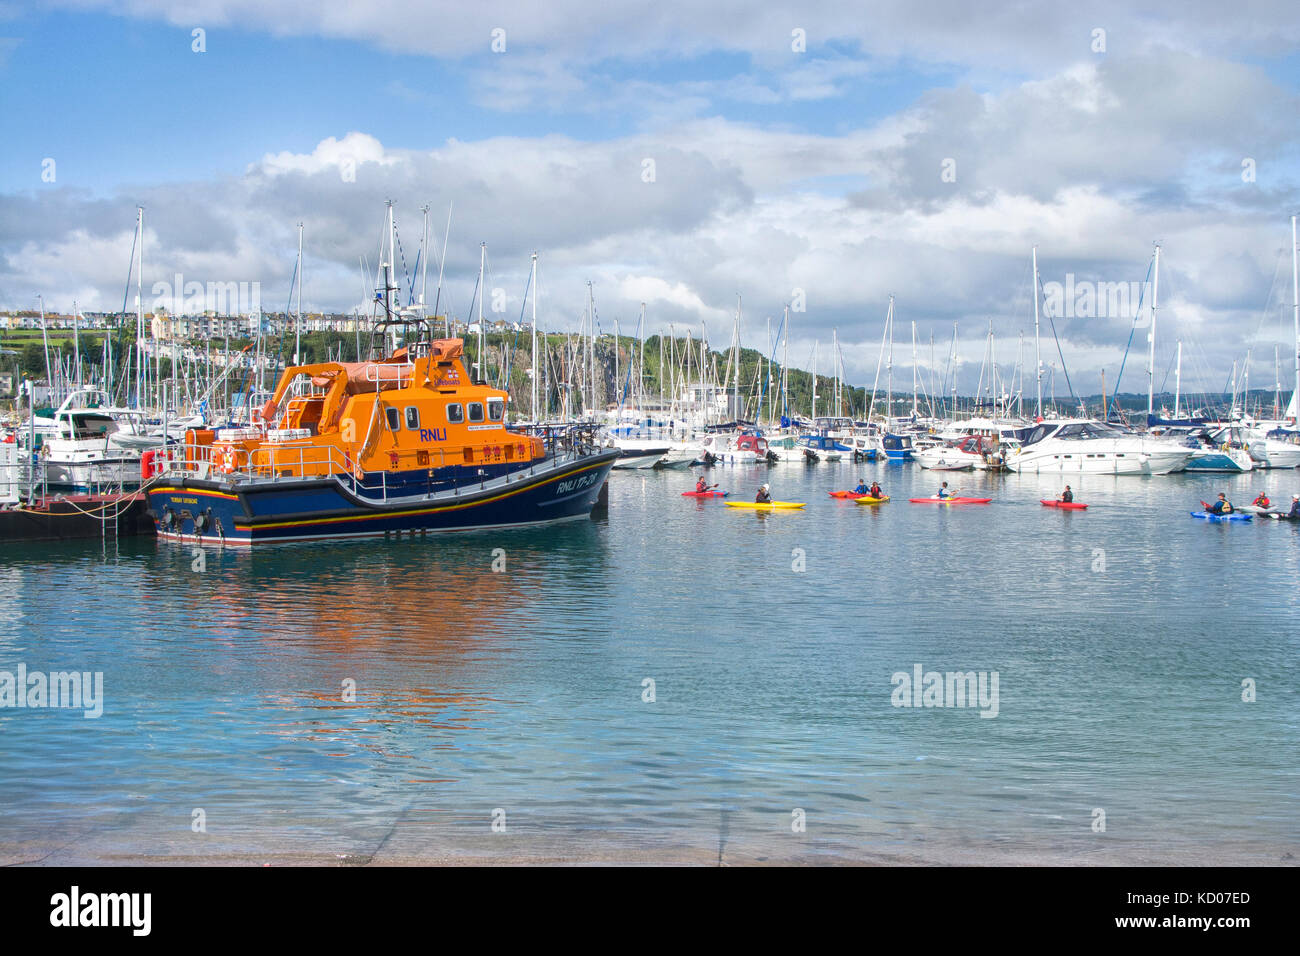 Summer in Brixham Harbour with children kayaking alongside the Torbay Lifeboat. Yachts and motor boats, pontoon and Brixham town in background. Stock Photo